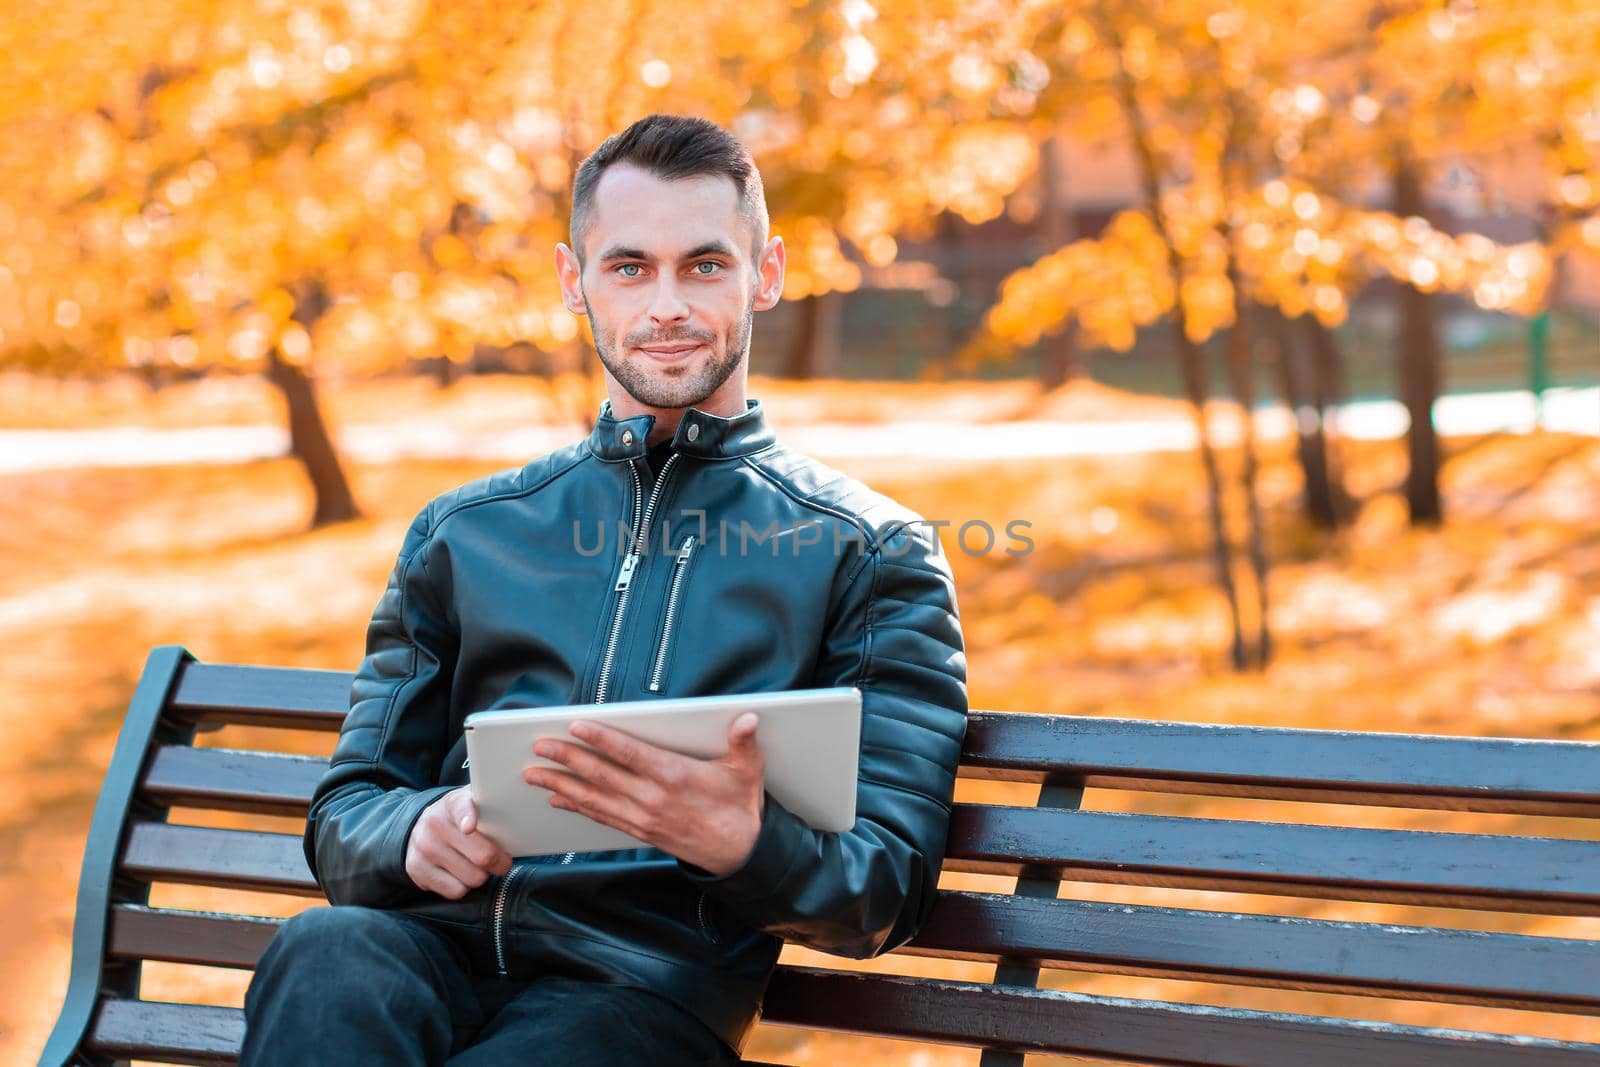 Youthful Guy Sitting on the Bench with Tablet PC by InfinitumProdux